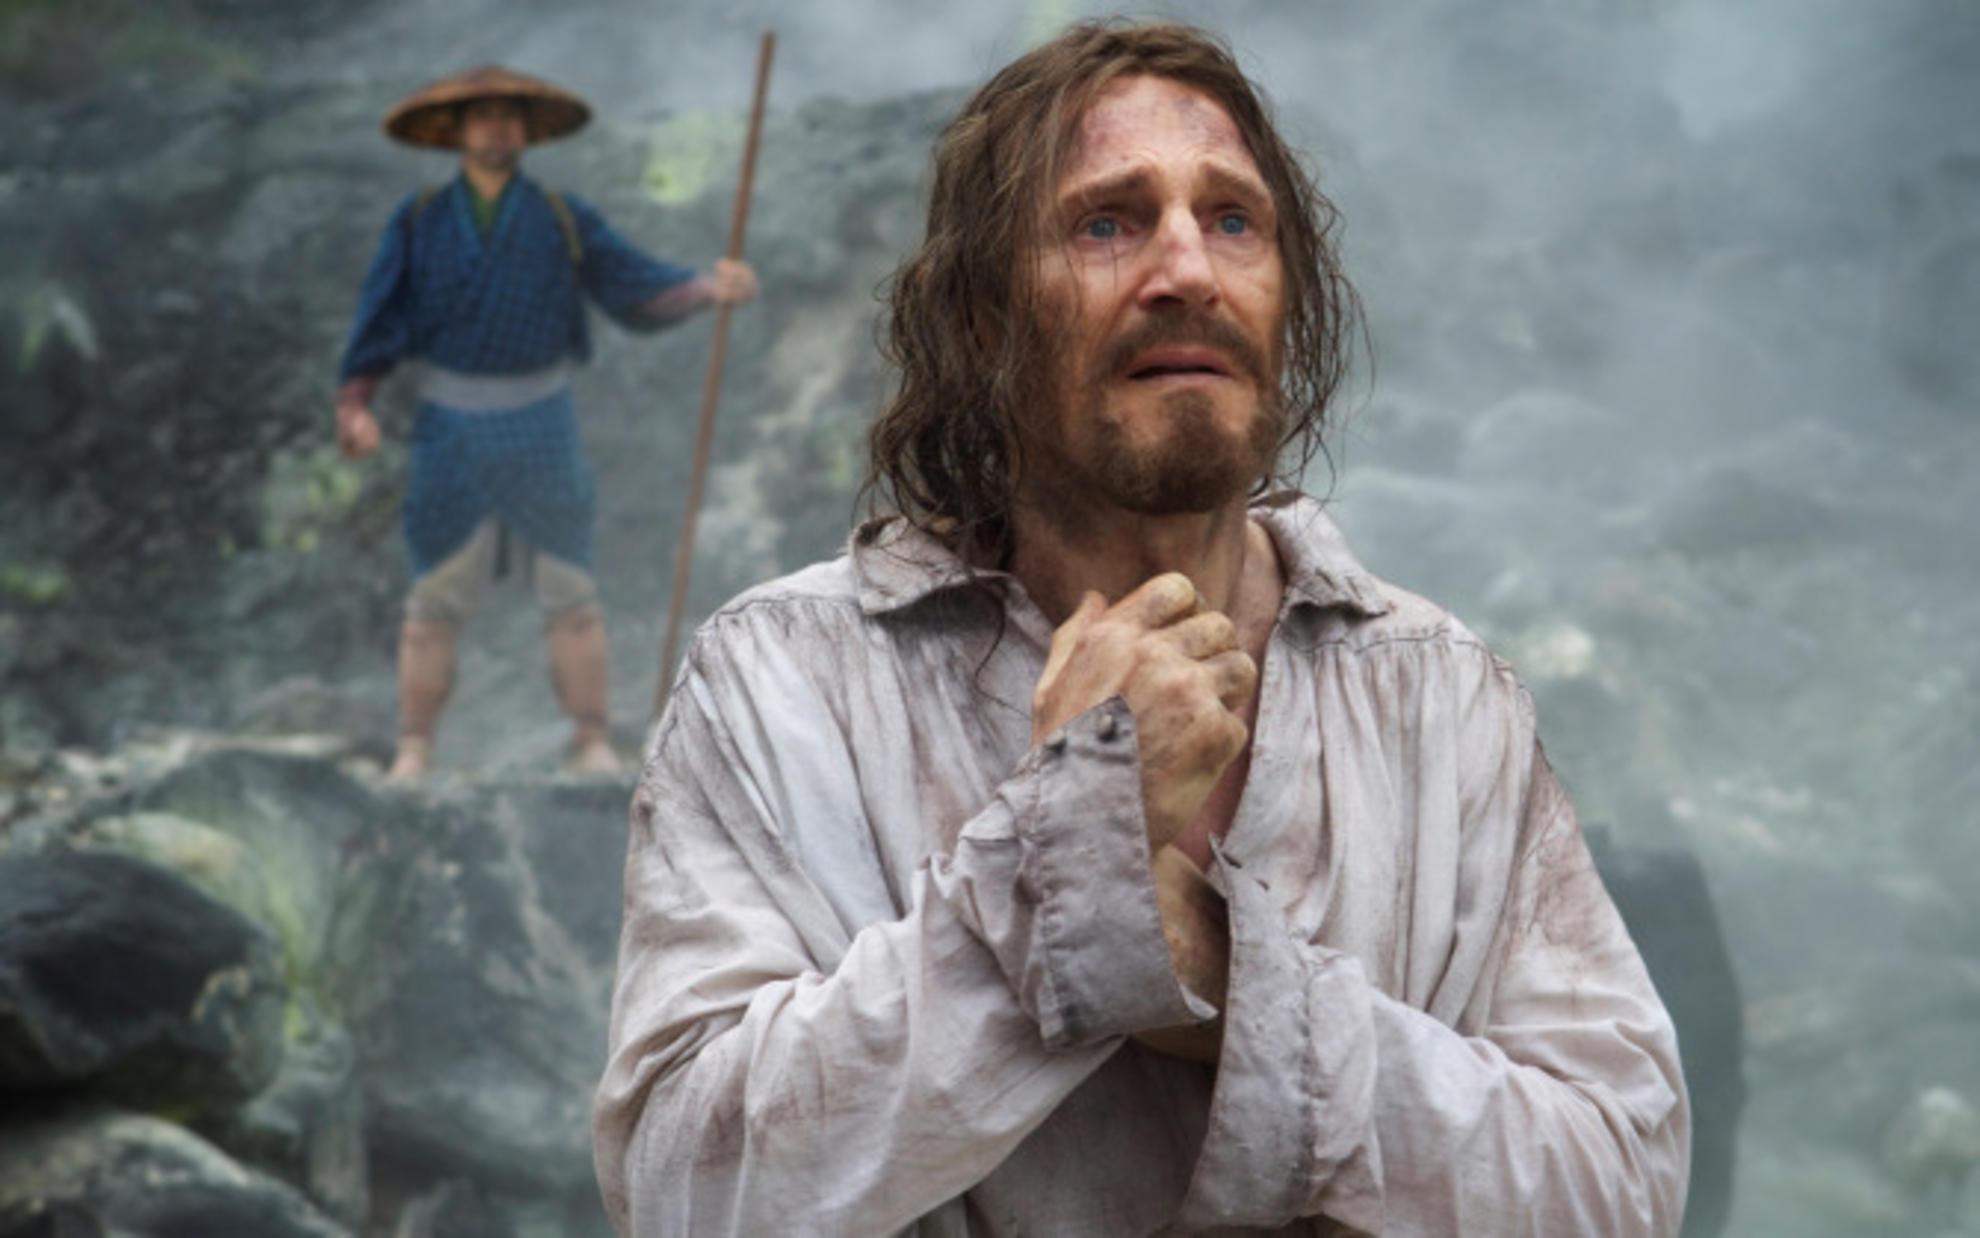 Liam Neeson plays a persecuted Jesuit in Martin Scorsese's Silence